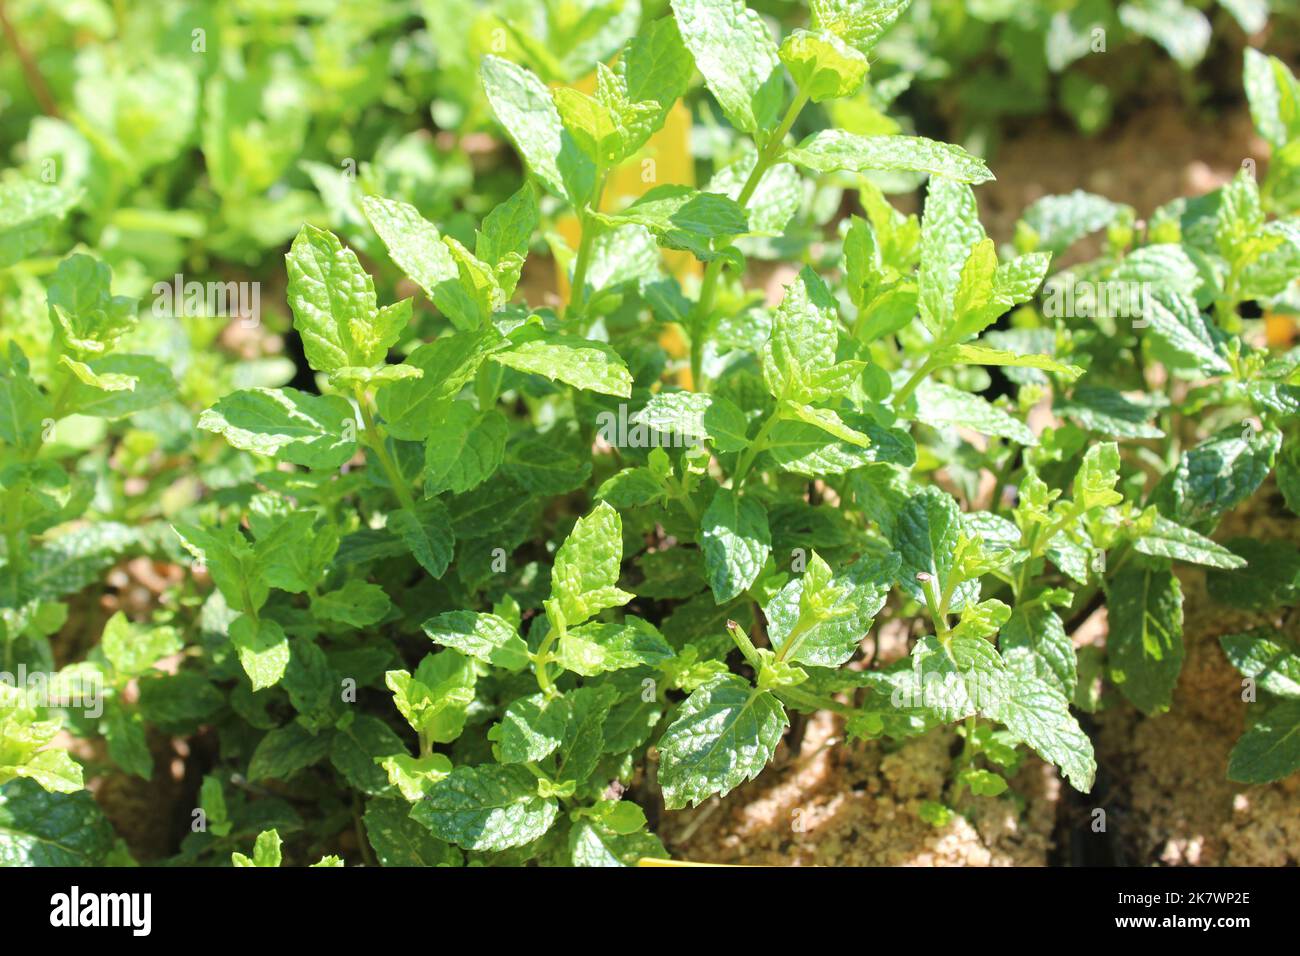 moroccan mint in the garden Stock Photo